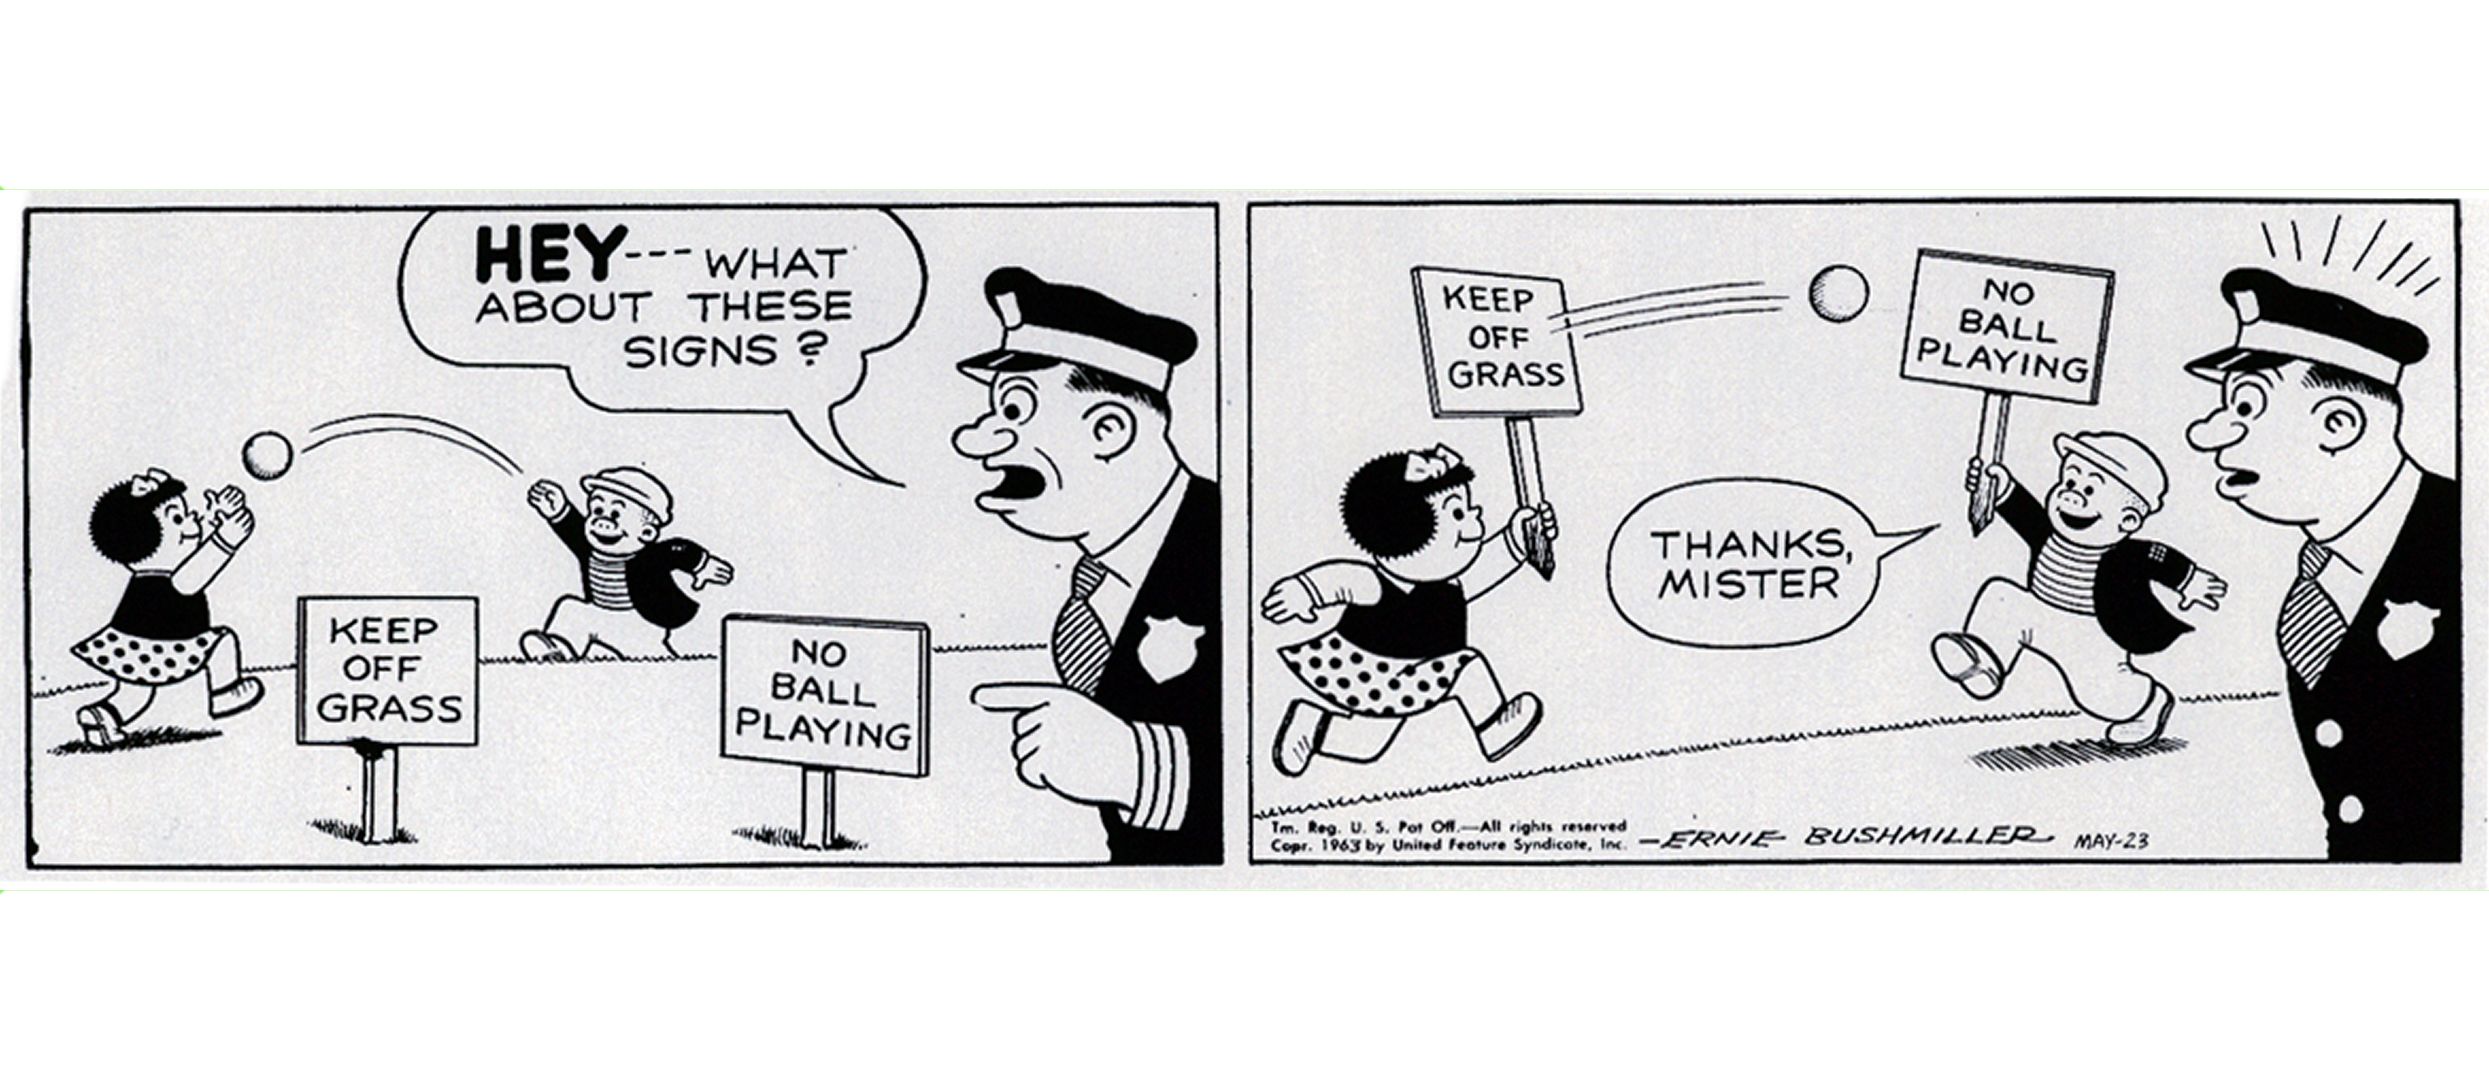 A two-panel comic of Nancy. She and Sluggo are playing catch on the grass, behind two signs that say "Keep off grass," and "No ball playing." The two pick up the signs and use them as paddles.